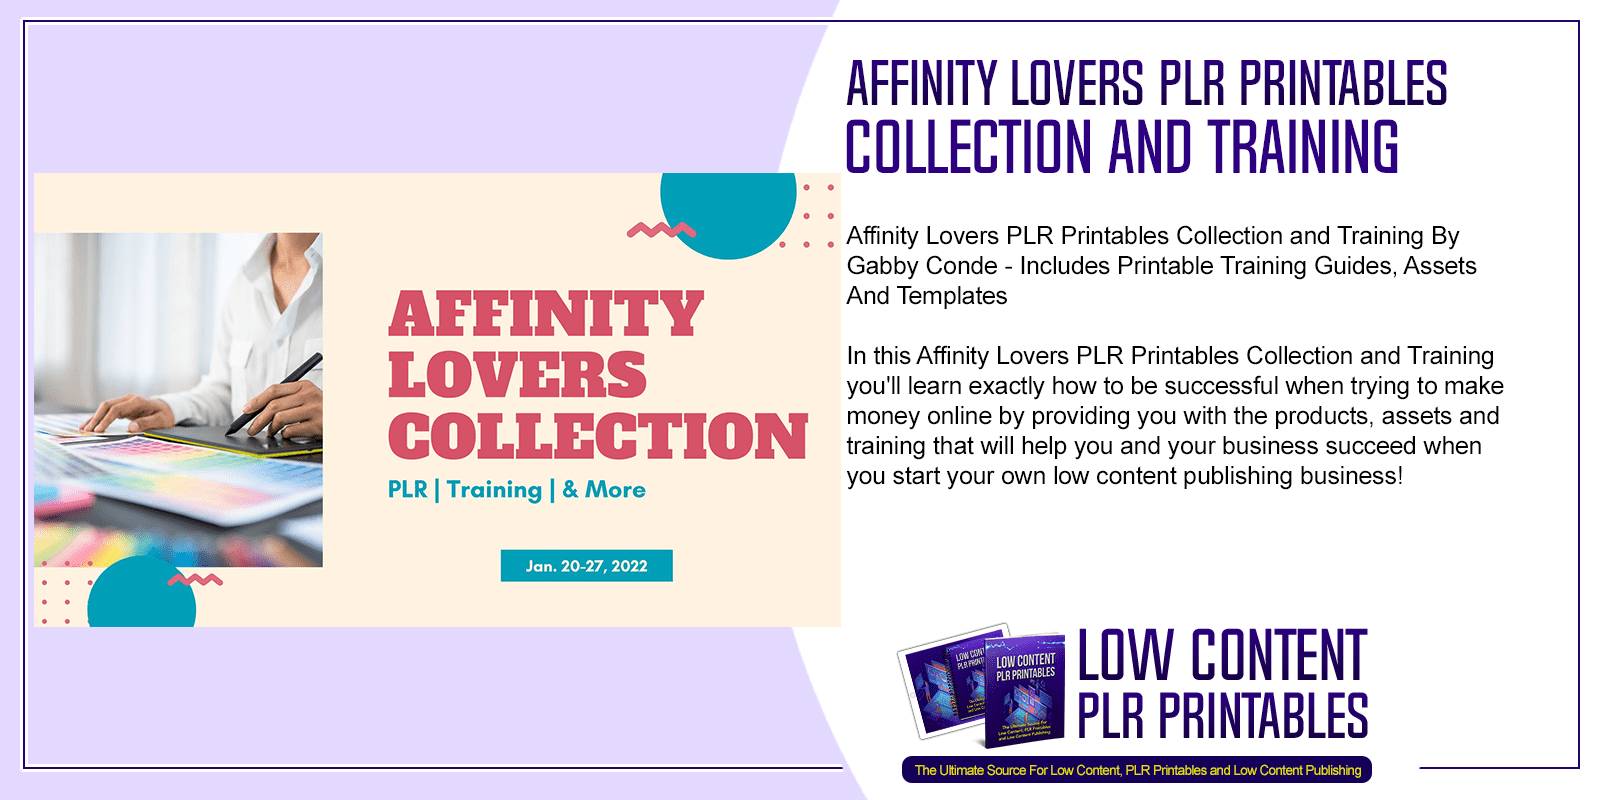 Affinity Lovers PLR Printables Collection and Training